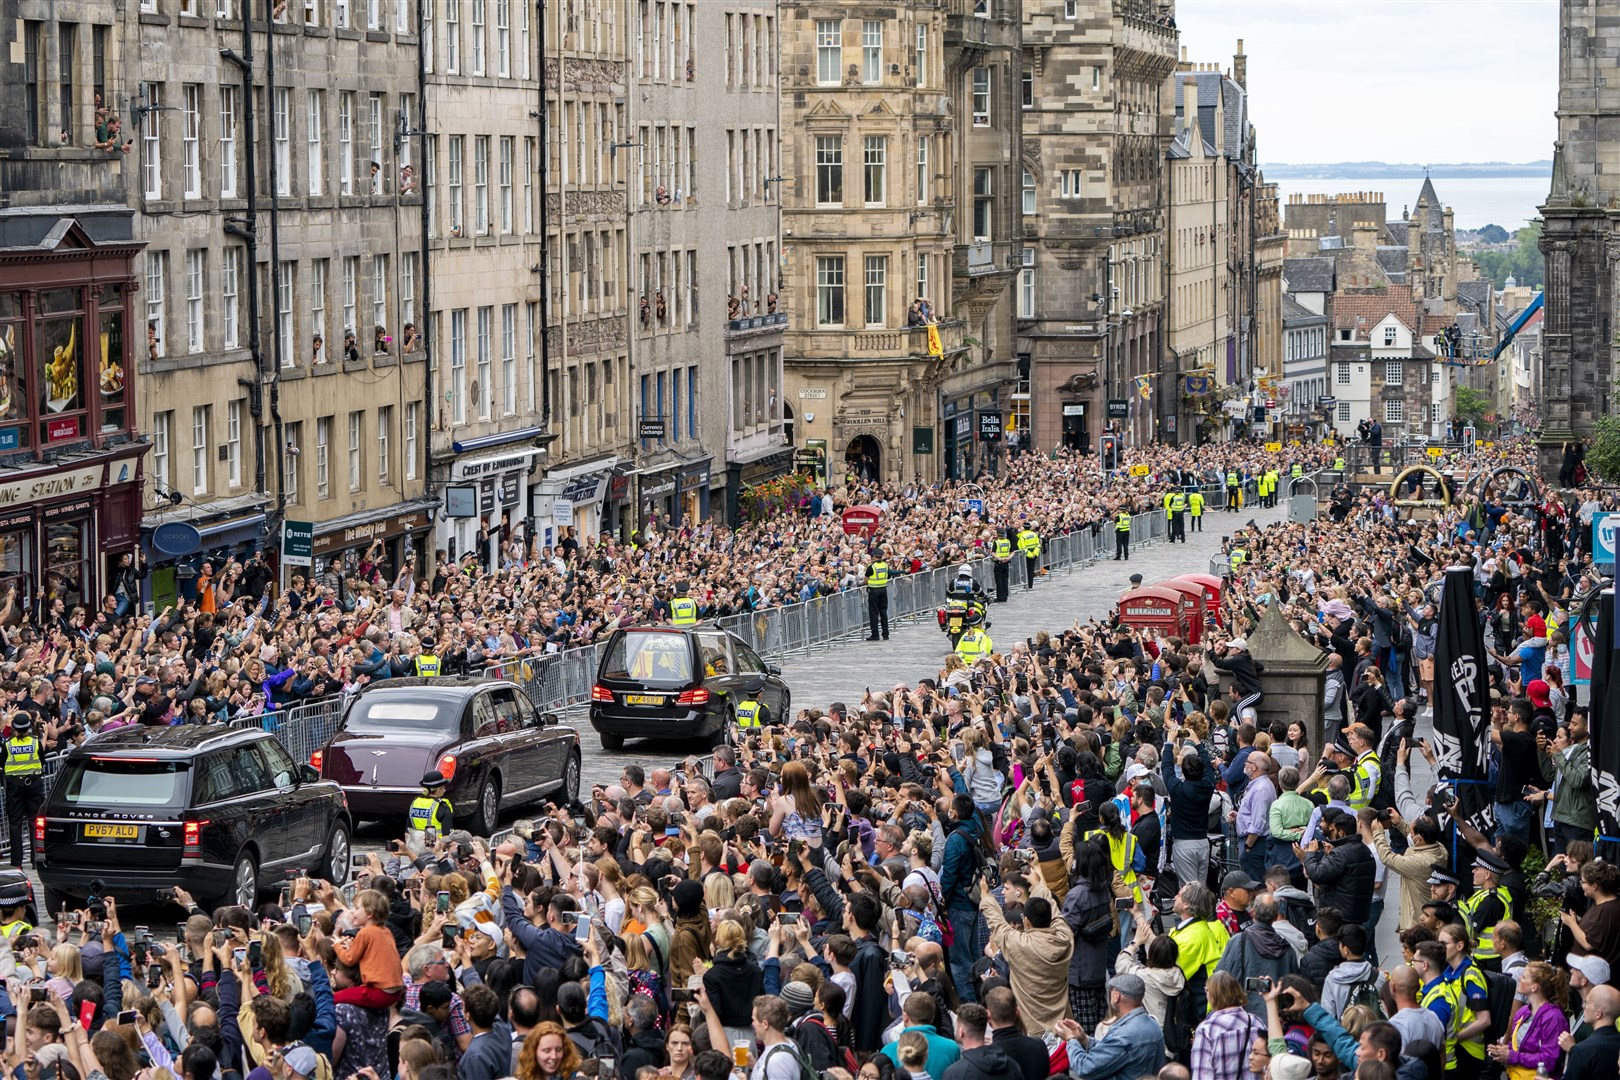 The Queen’s coffin arrived in Edinburgh on Sunday (Jane Barlow/PA)